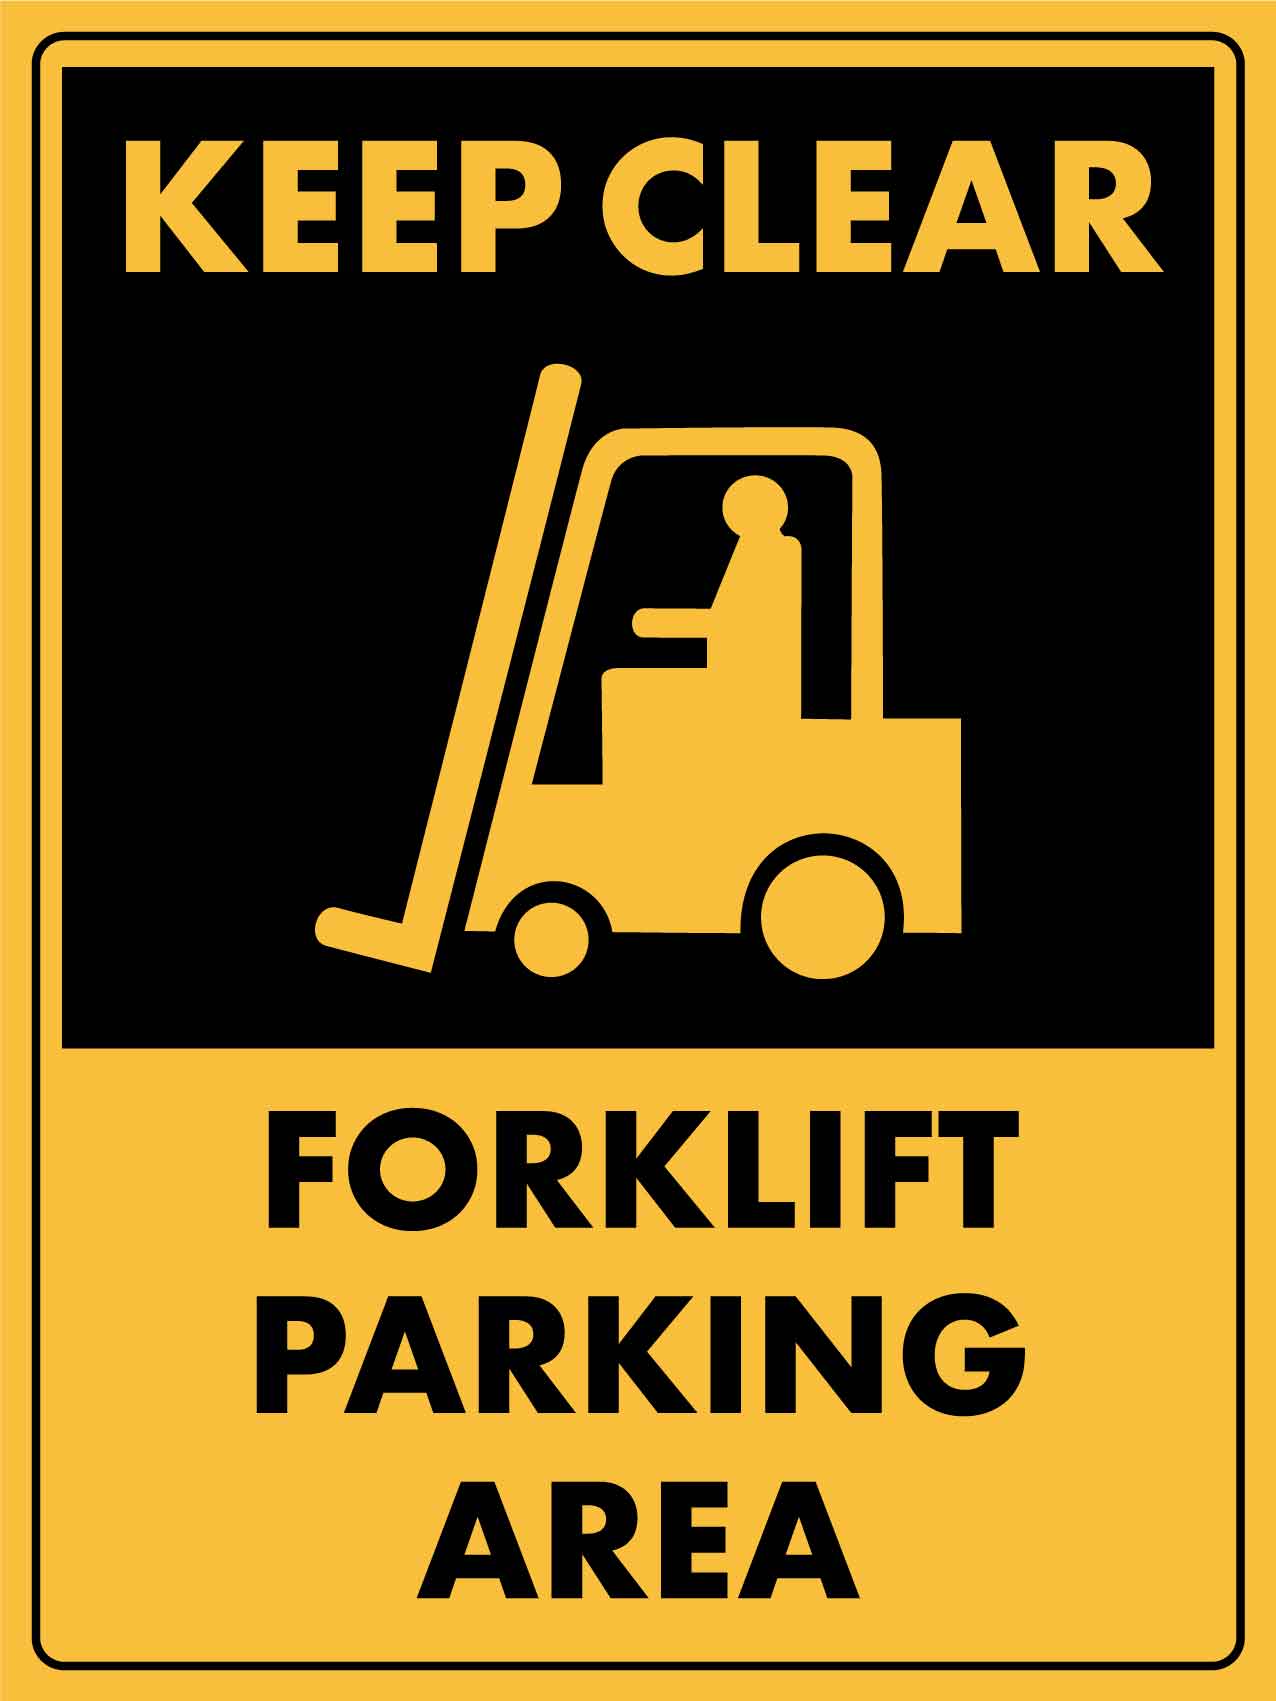 Keep Clear Forklift Parking Area Sign